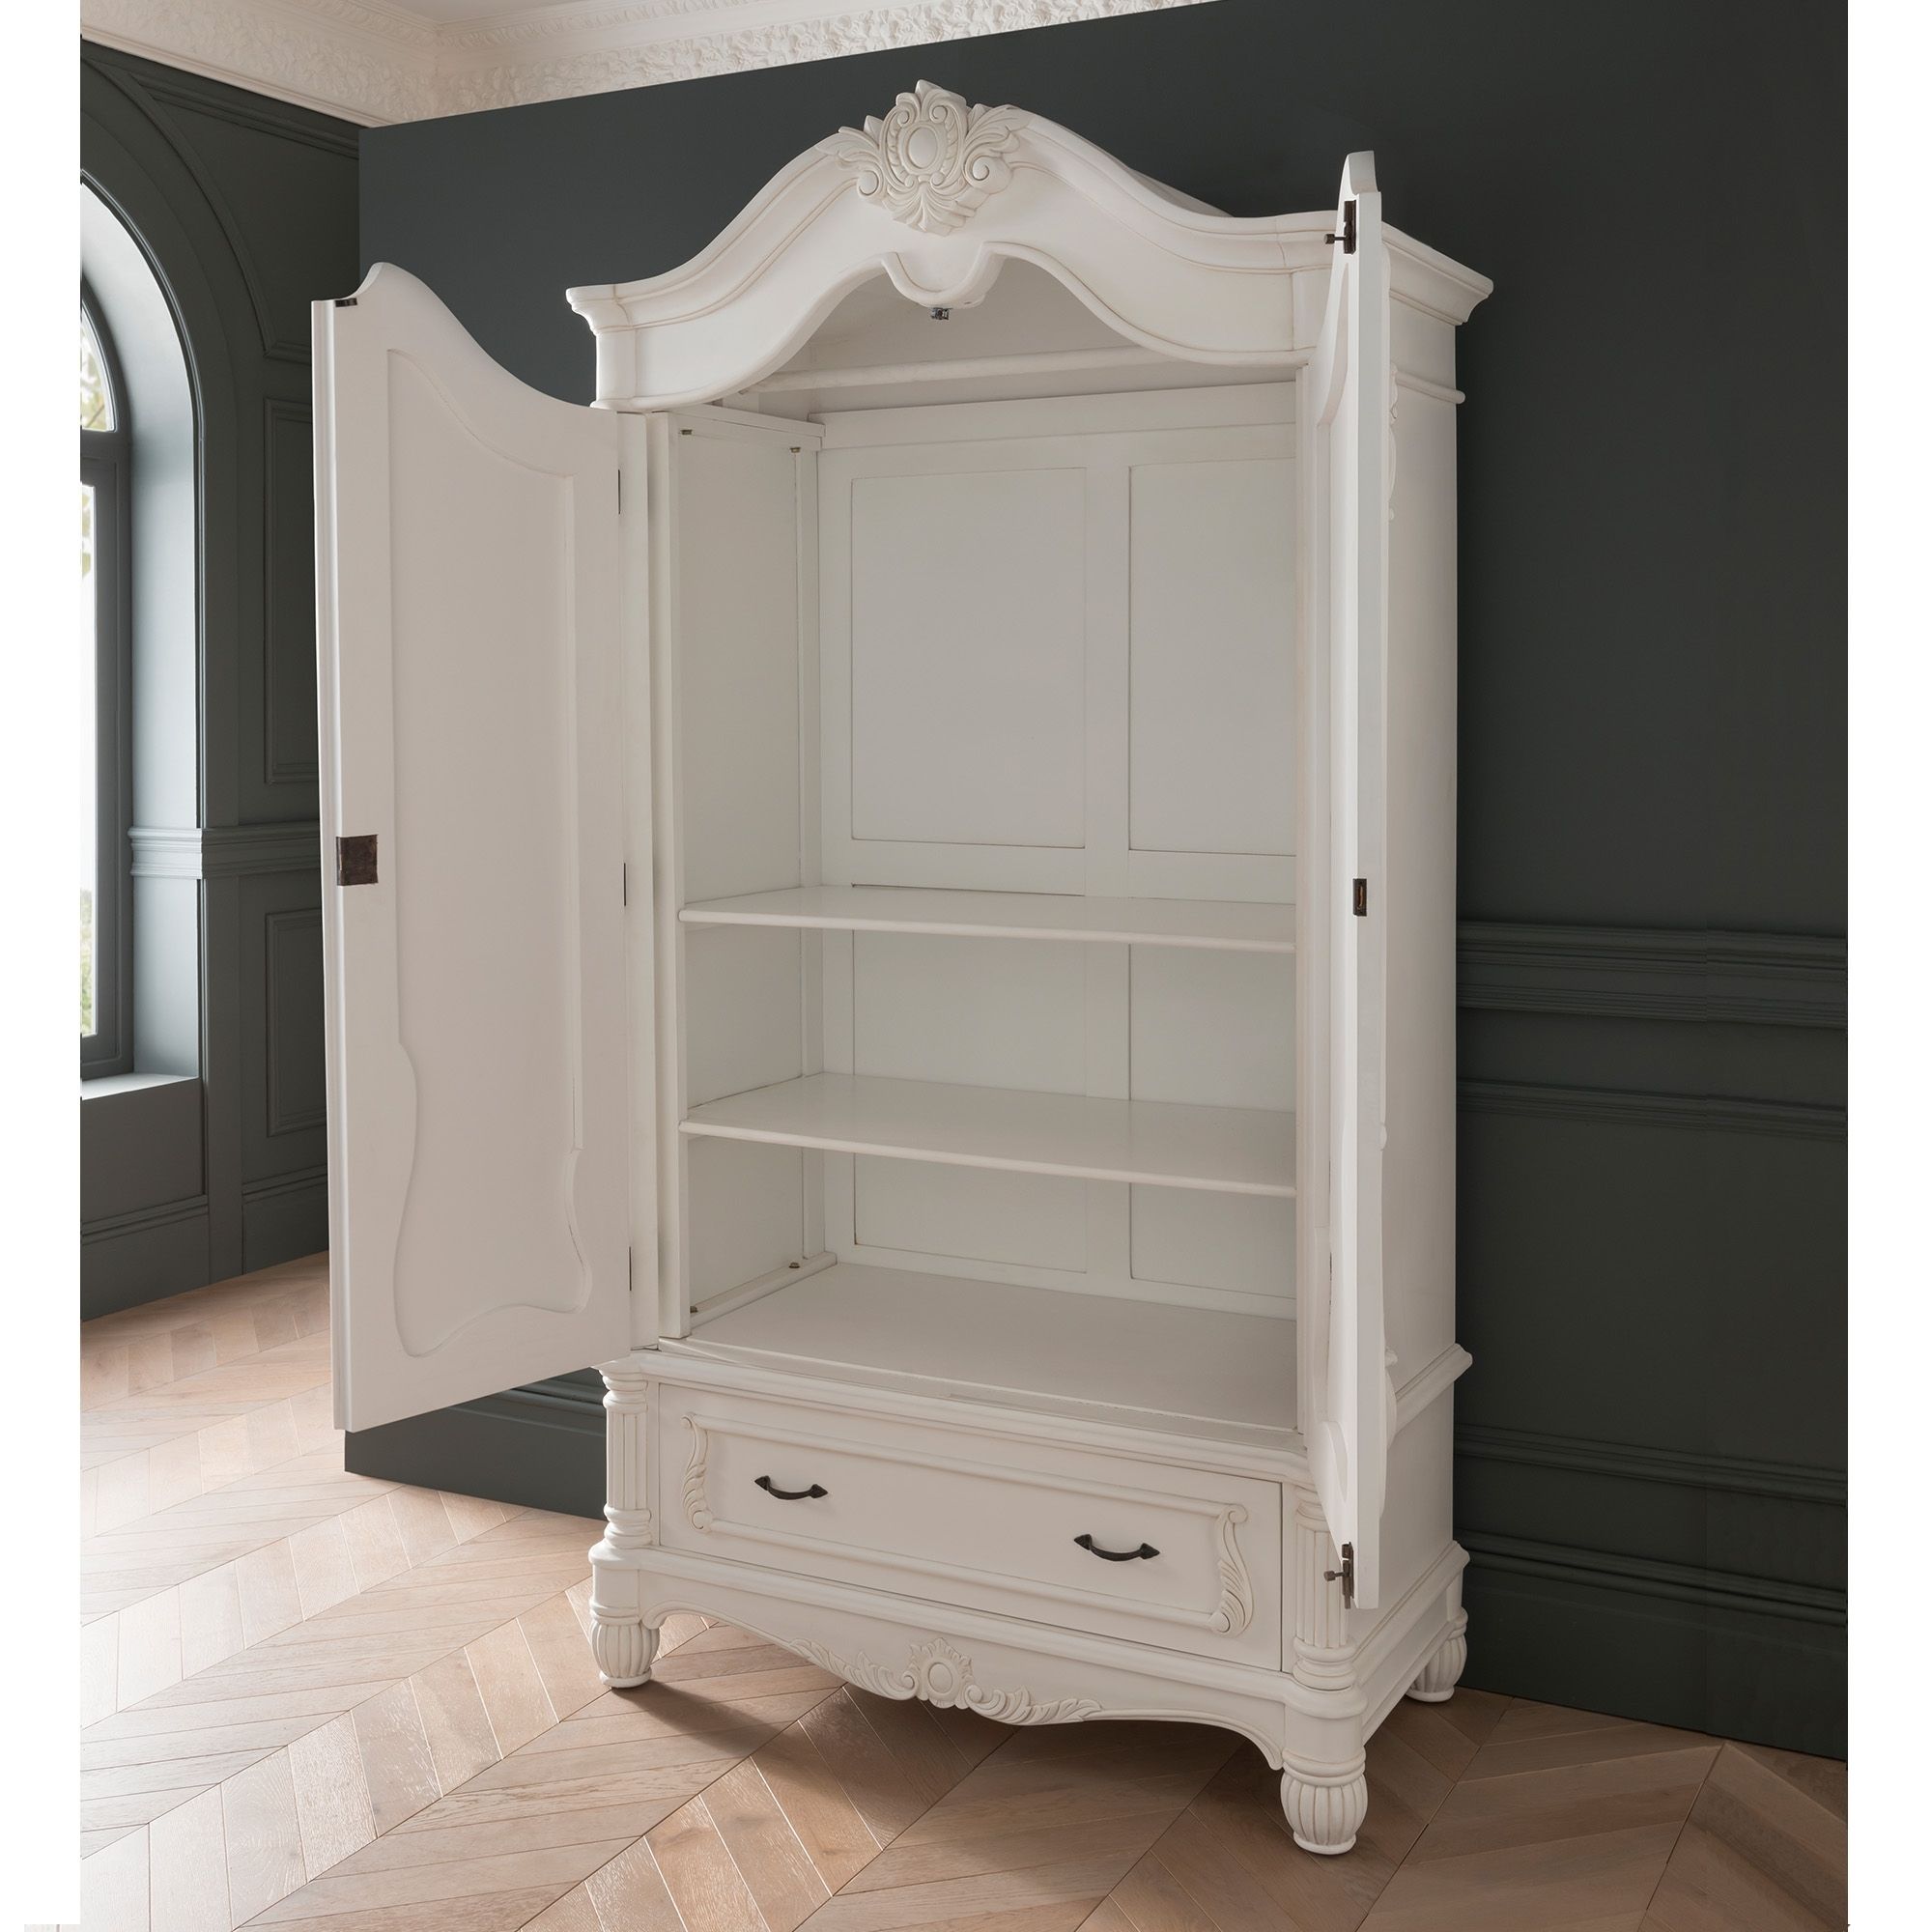 Antique French Style White Finished 1 Drawer Wardrobe | Homesdirect365 Regarding French Style White Wardrobes (View 2 of 15)